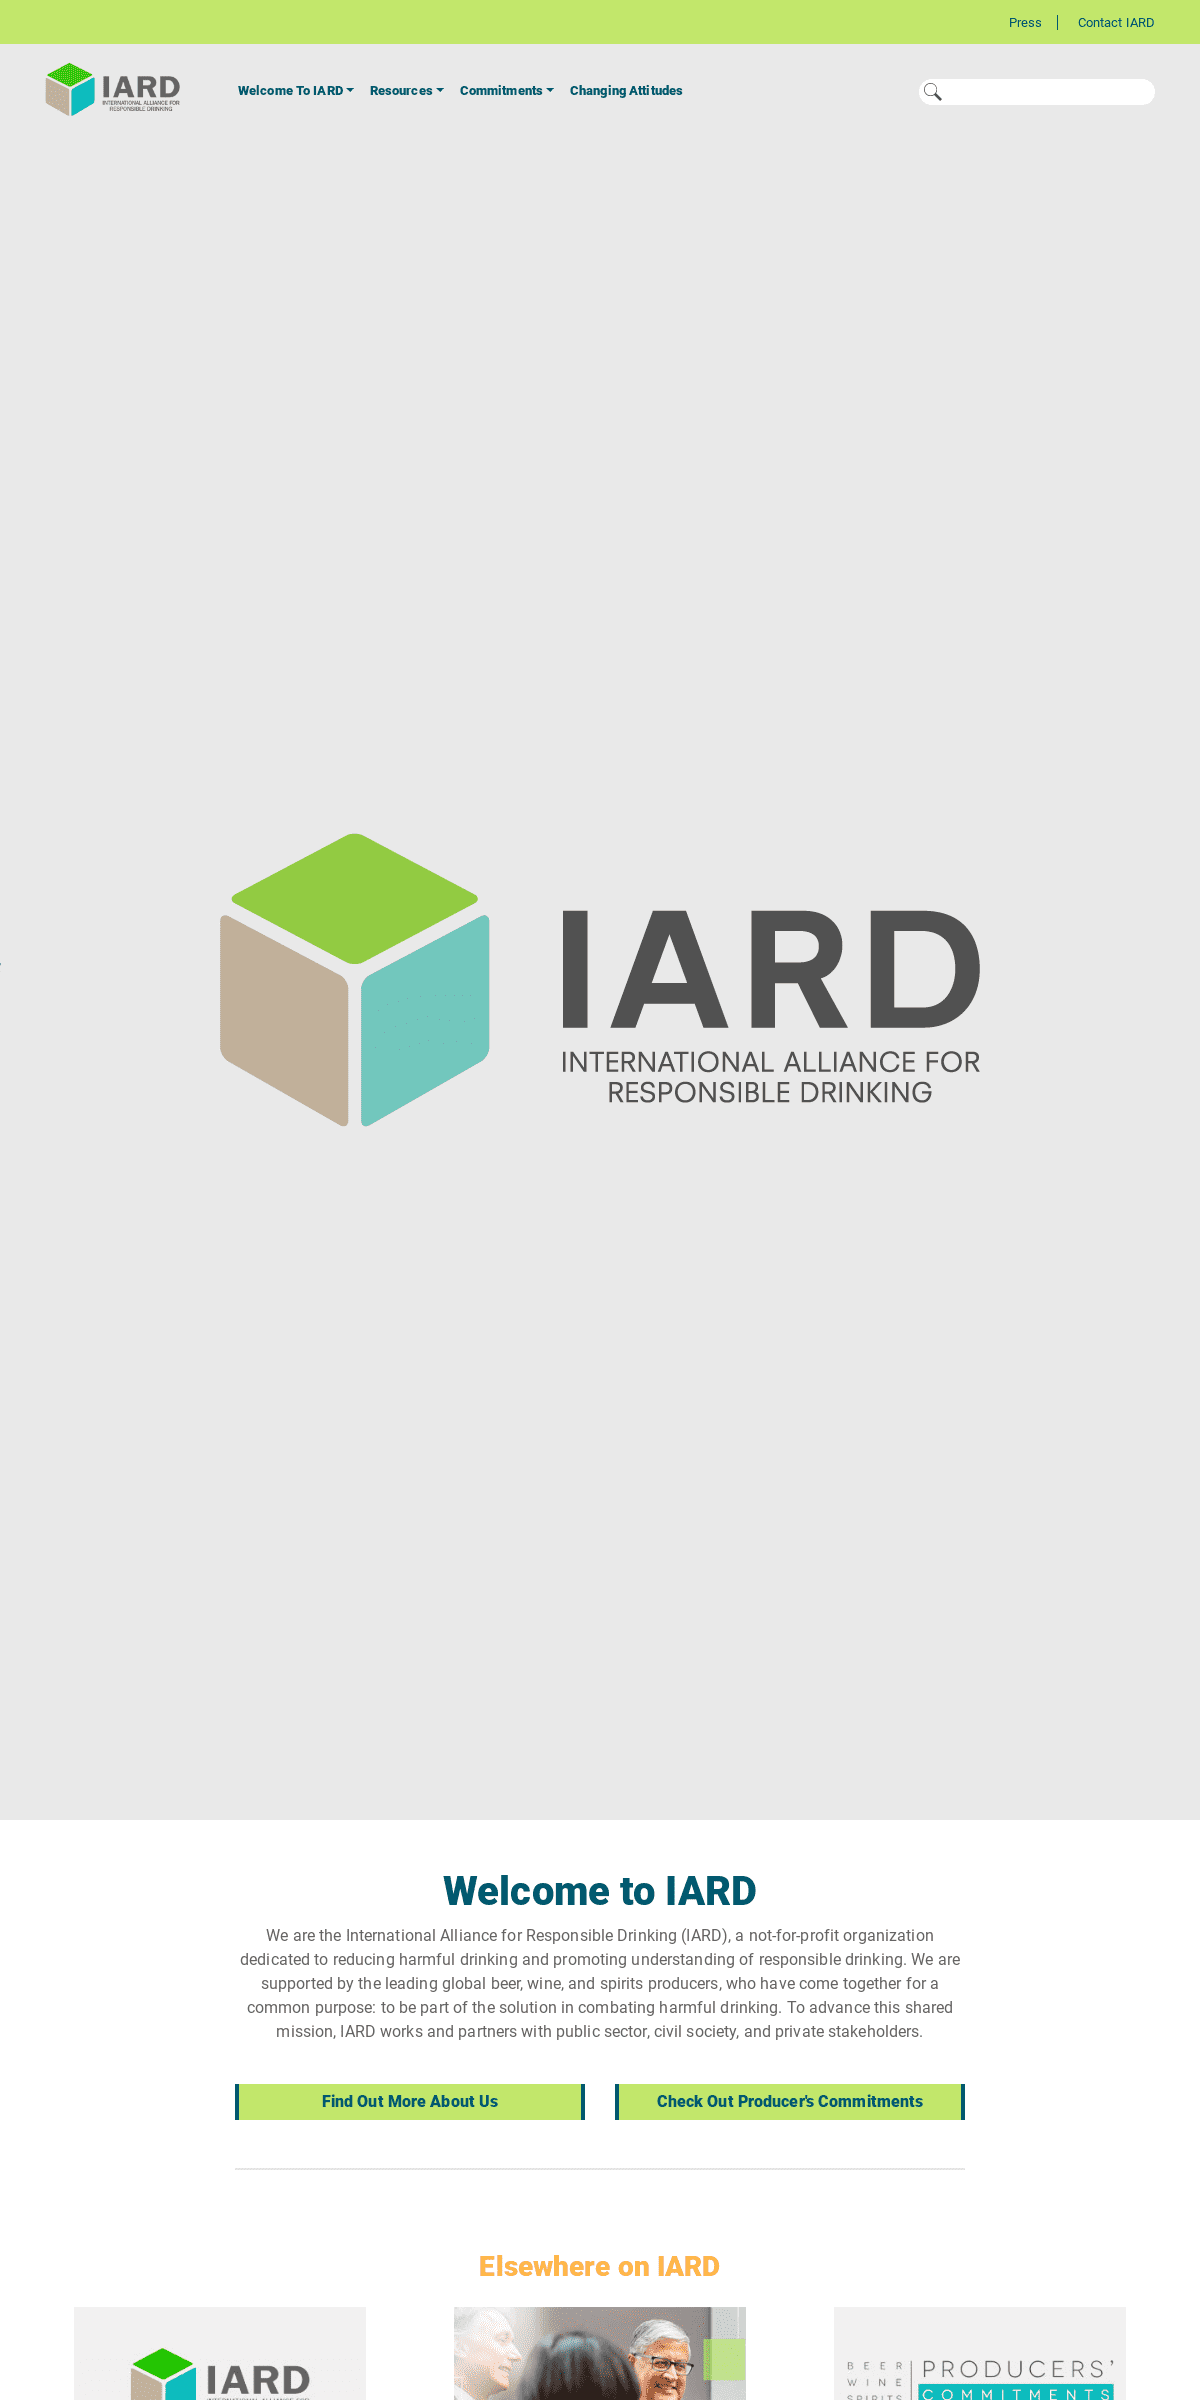 A complete backup of iard.org